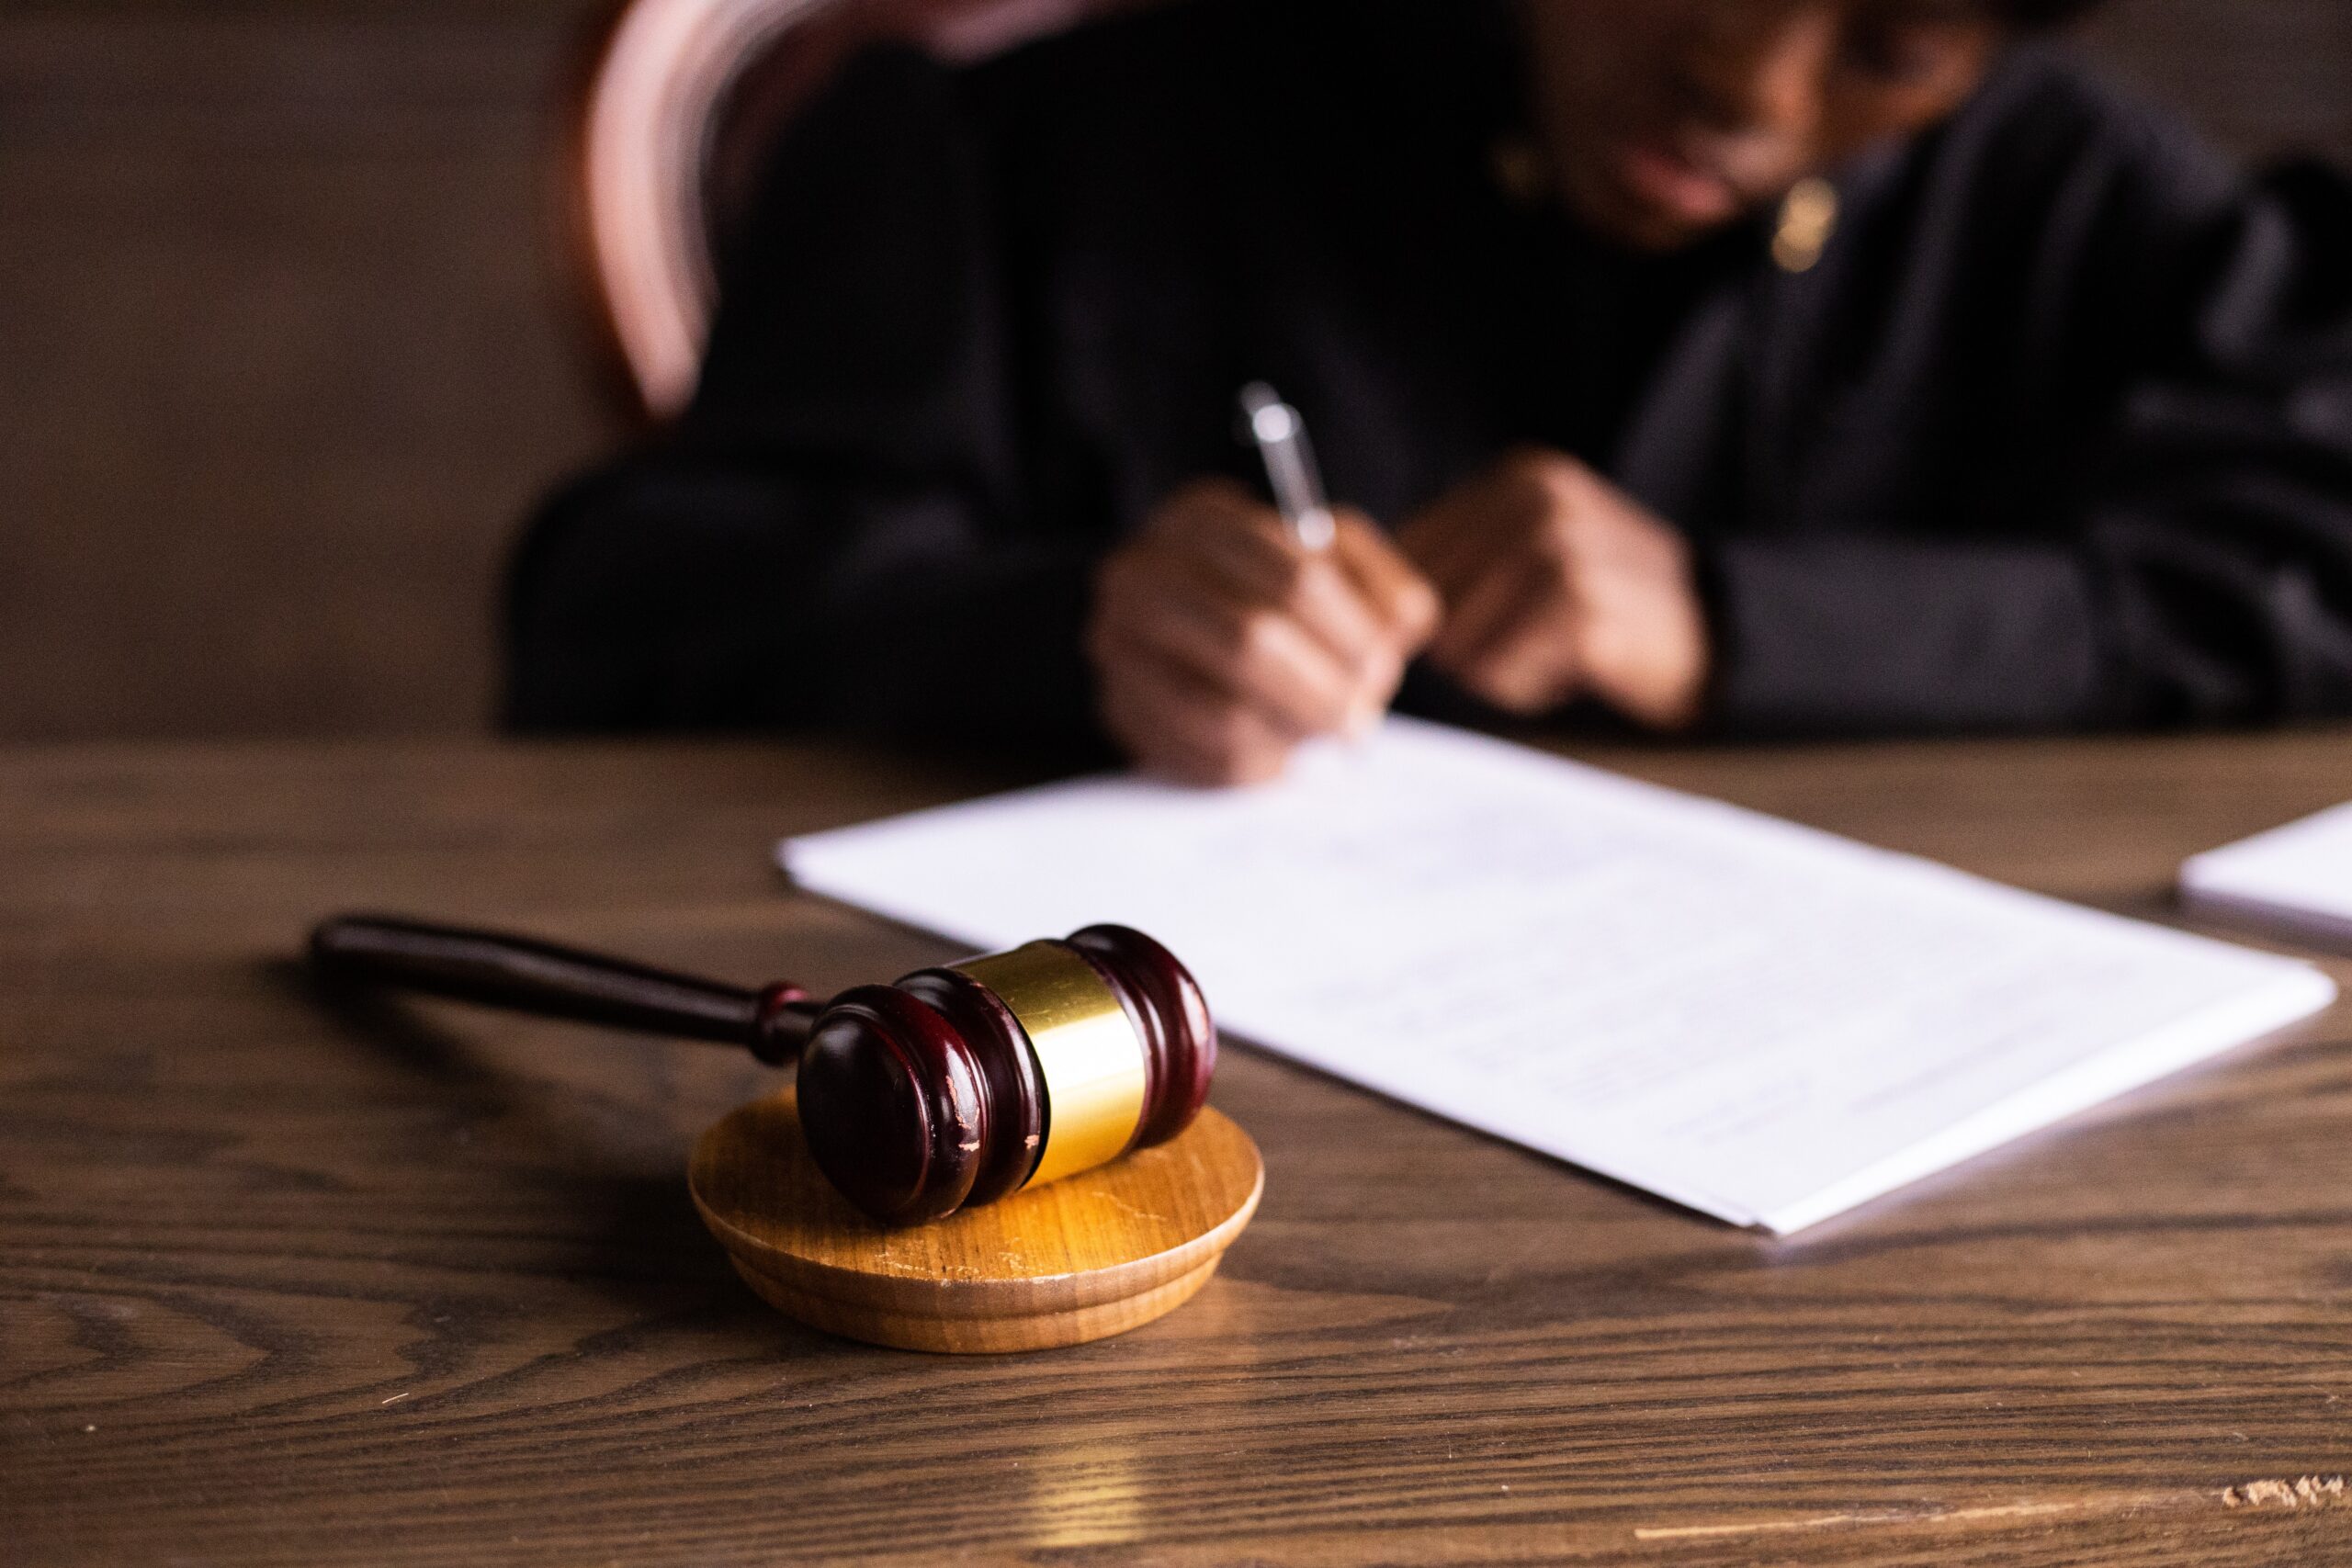 What Types Of Family Law Cases Are The Courts Currently Hearing?